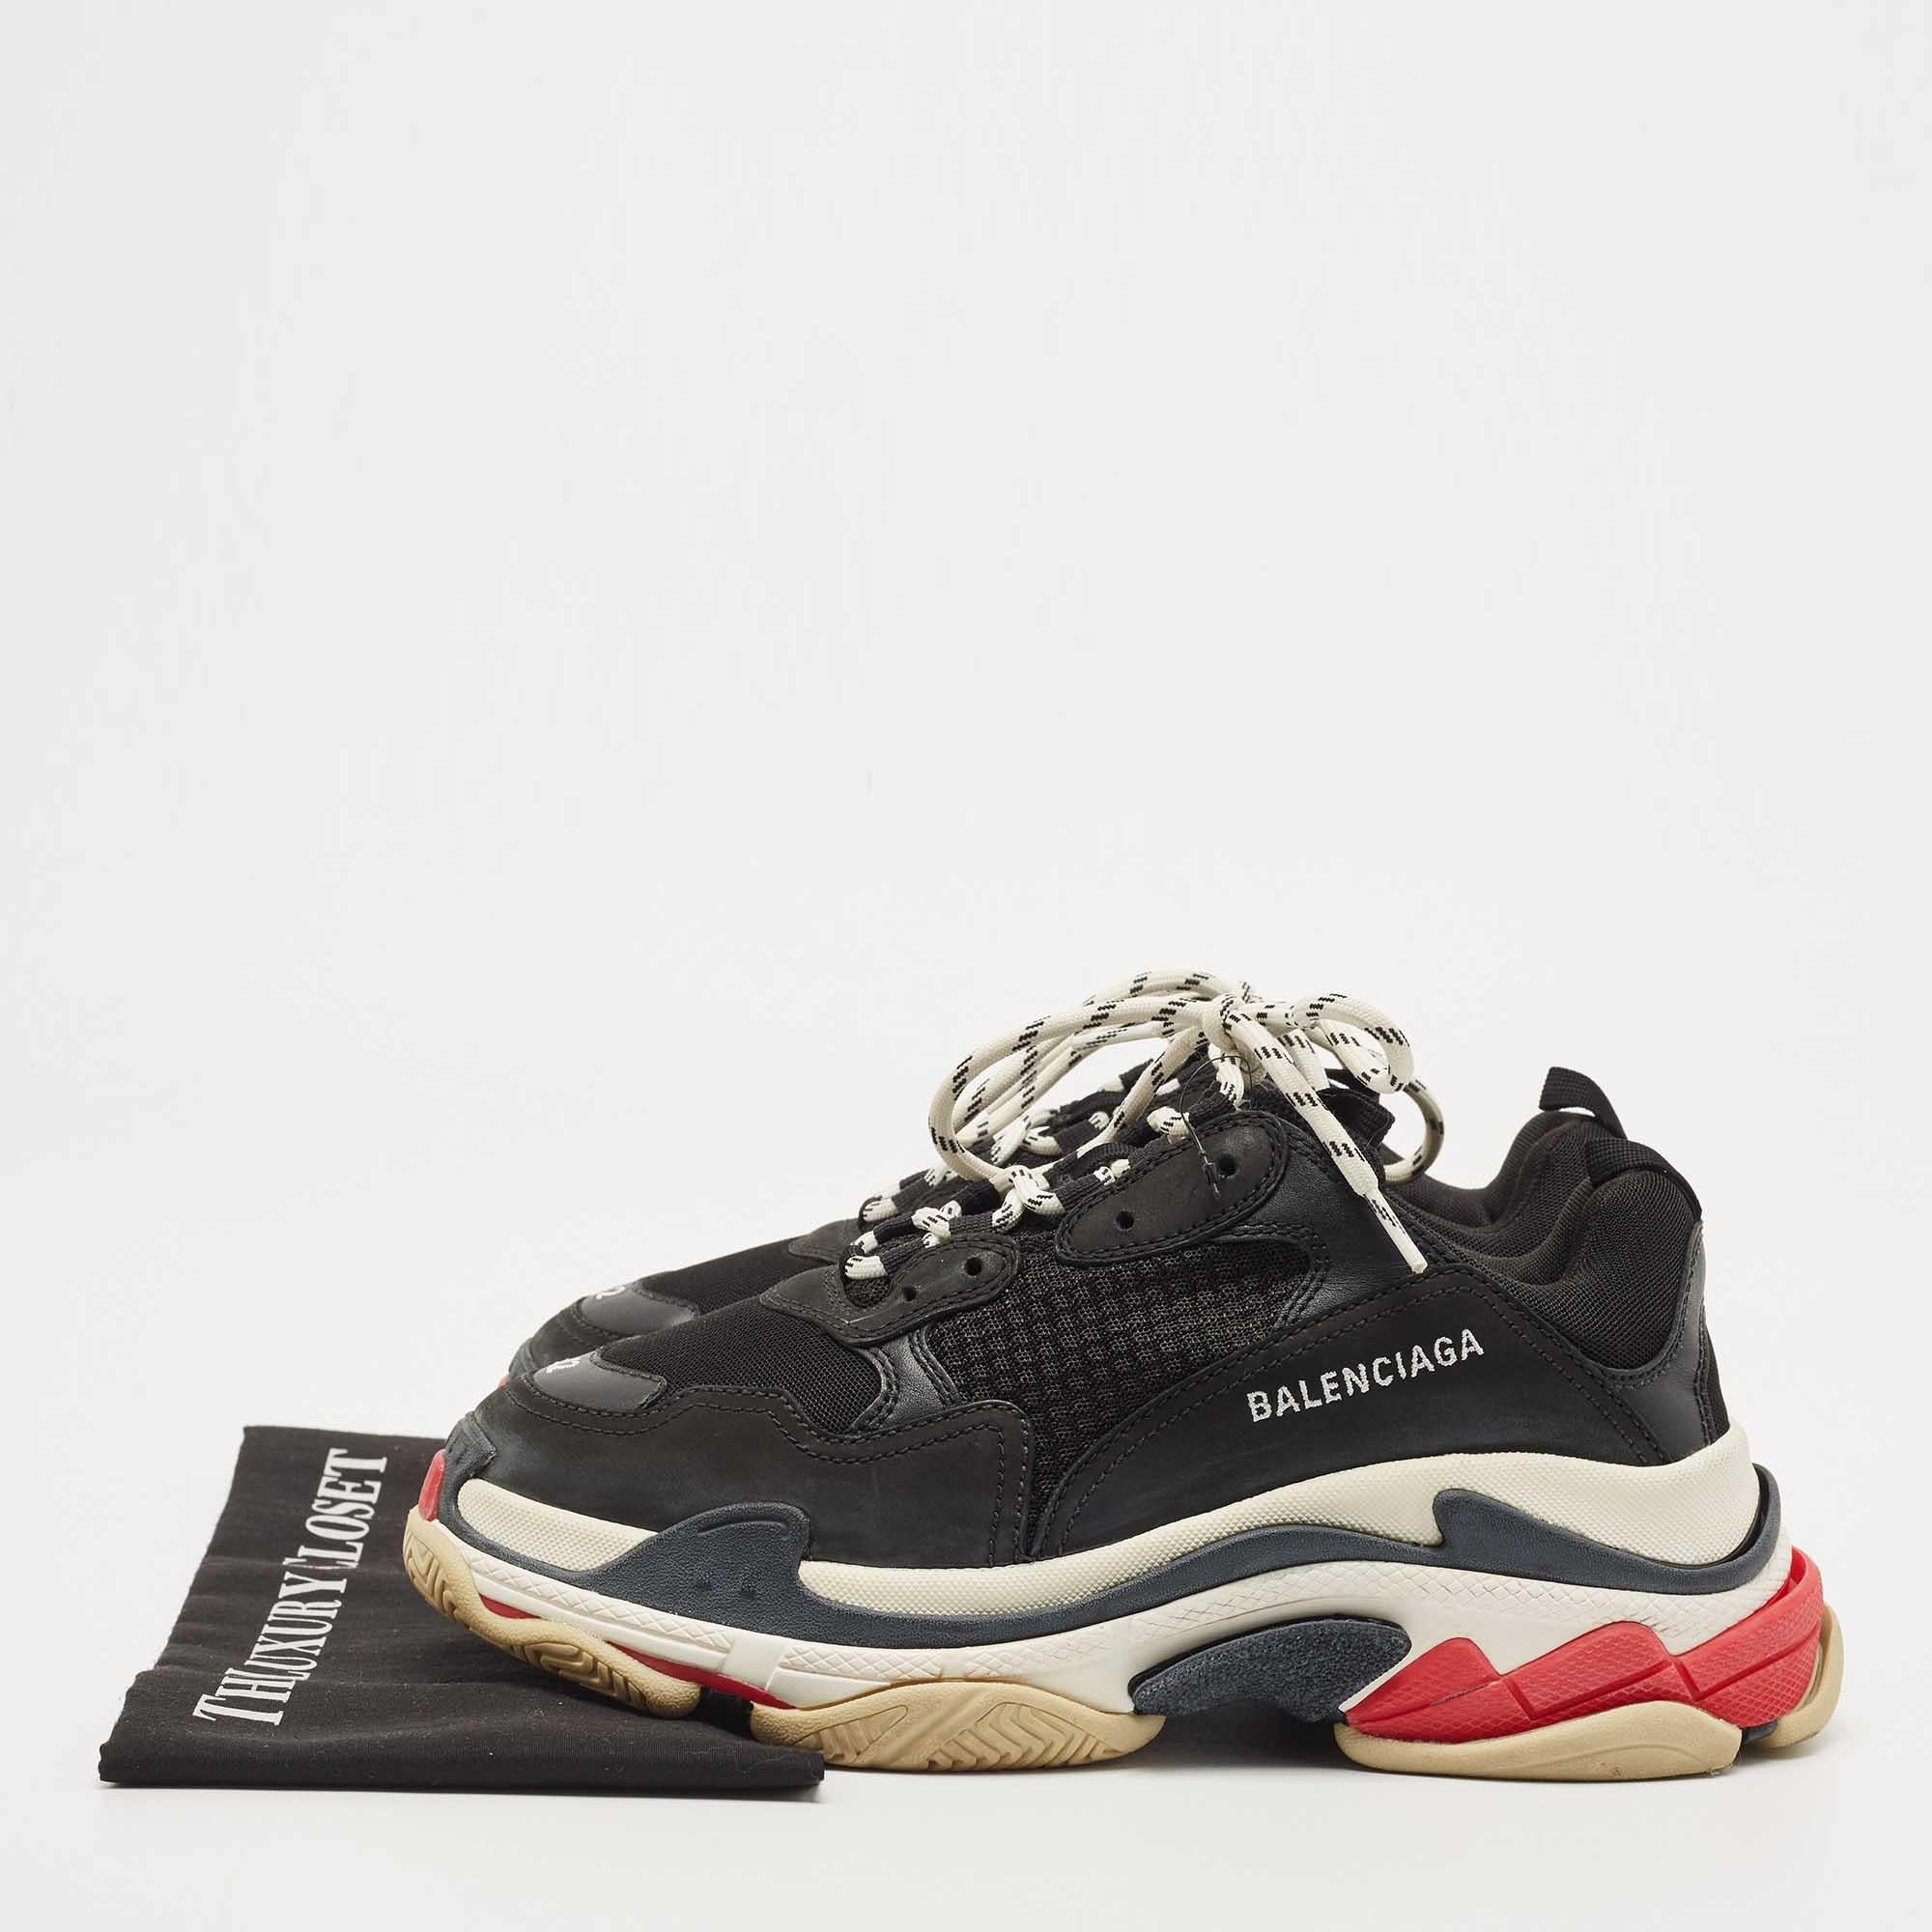 Balenciaga Black Mesh and Leather Triple S Lace Up Sneaker For Sale 2